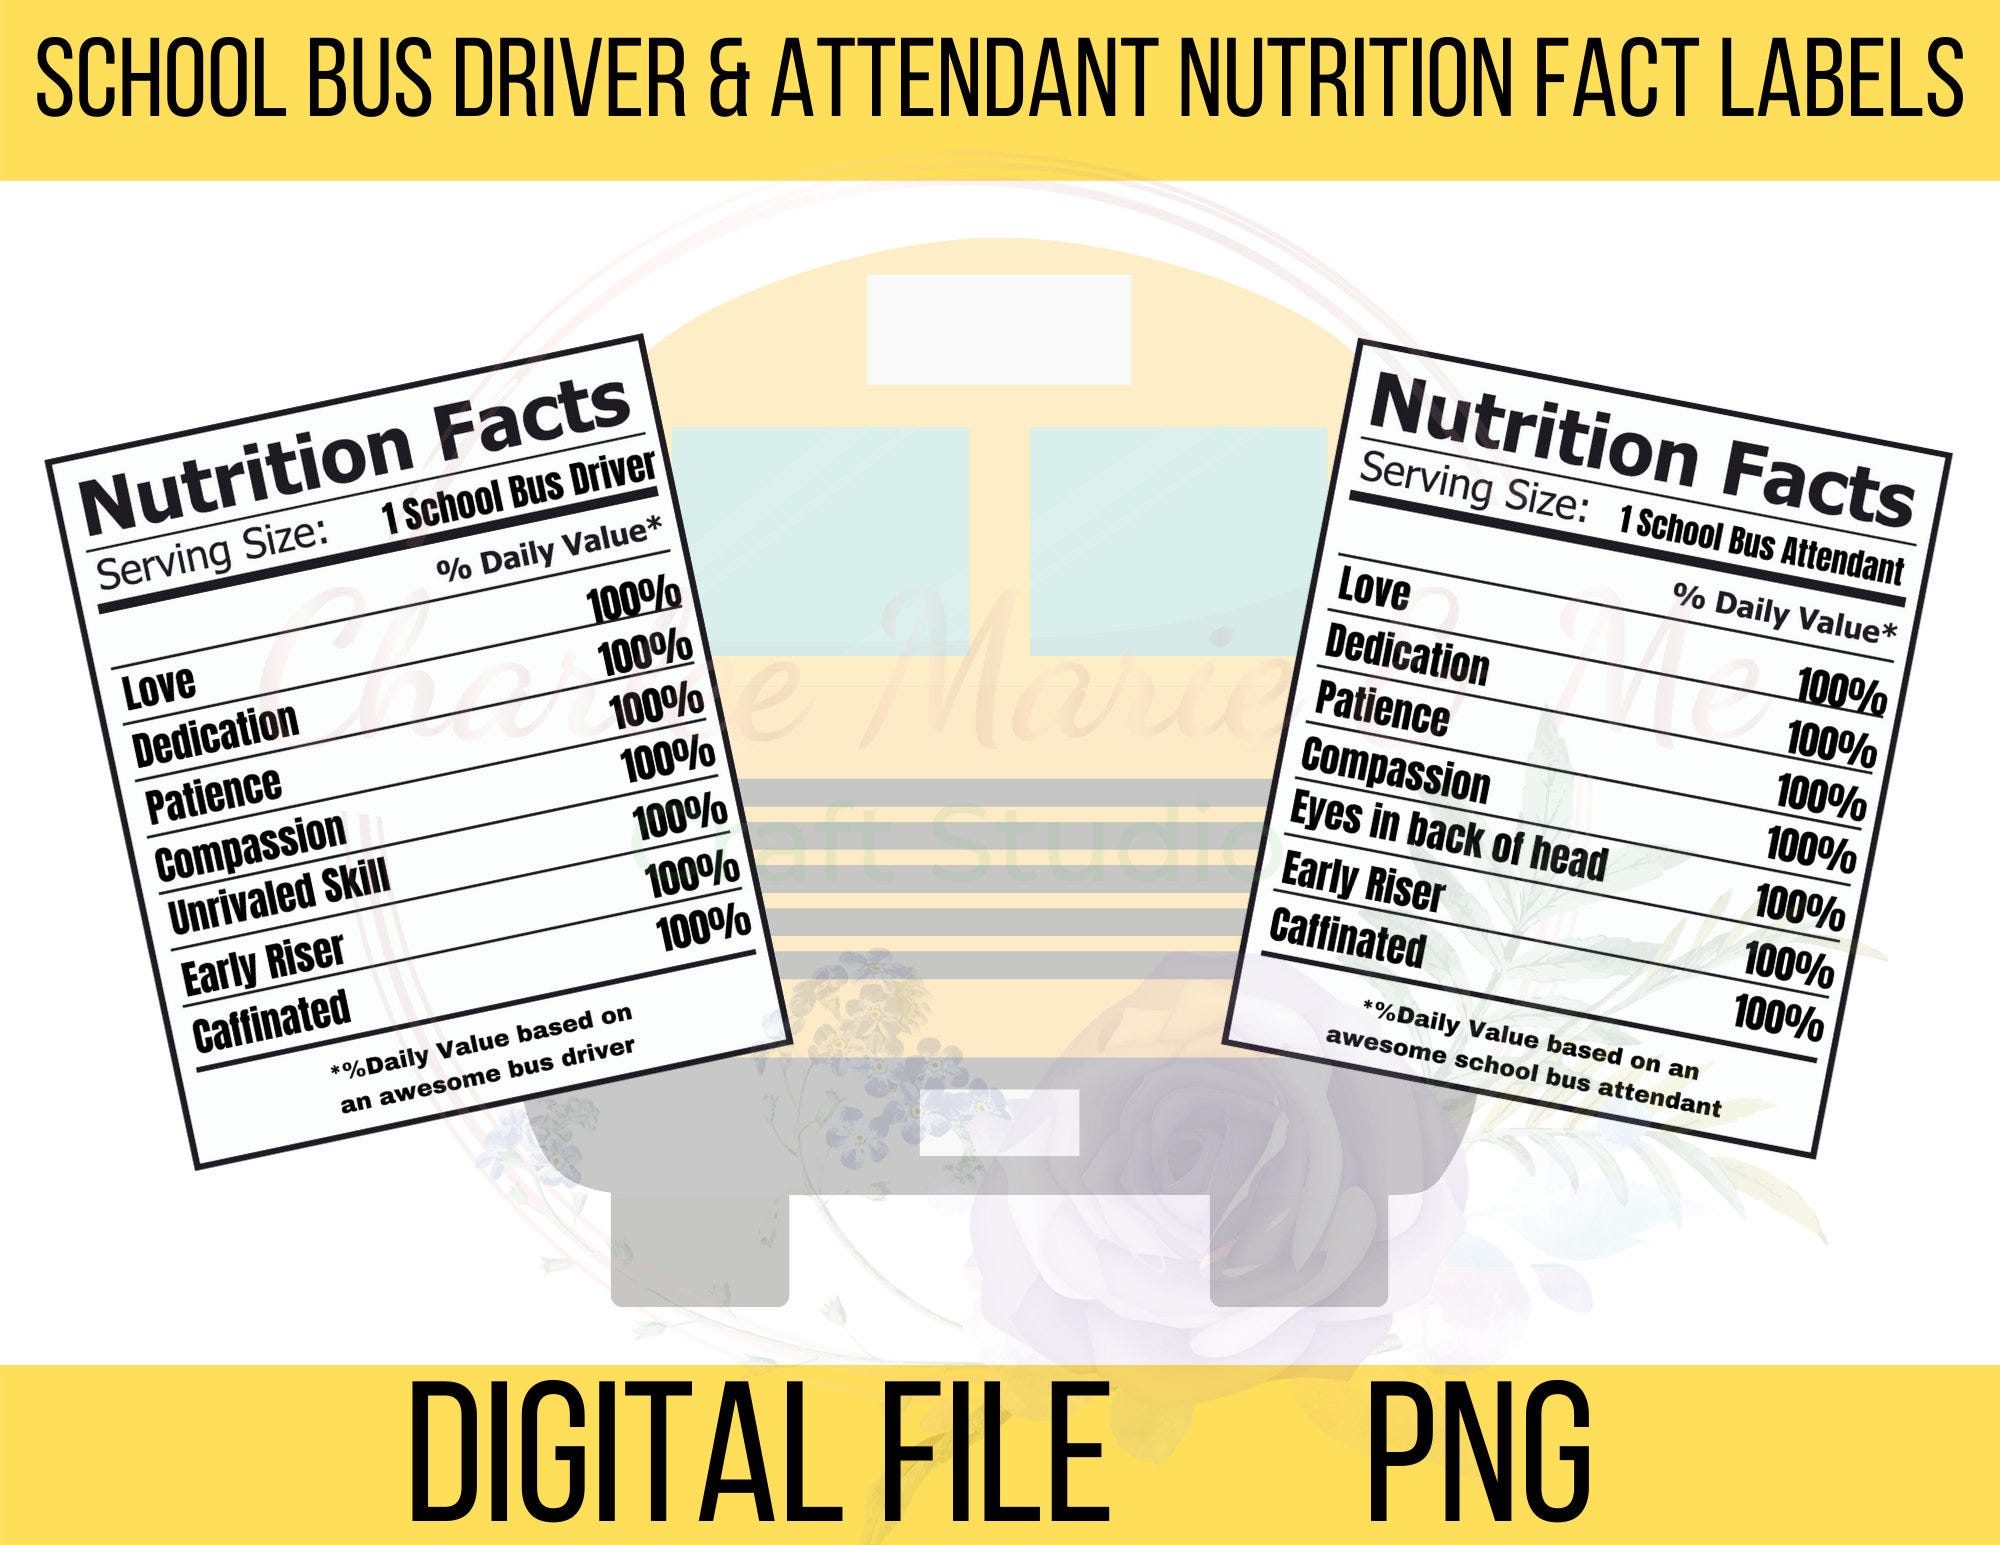 Bus Driver Nutrition Facts PNG, Bus Attendant Nutrition Facts PNG, Bus Aide Nutrition Facts, Bus Monitor PNG, Nutrition Facts, School Bus